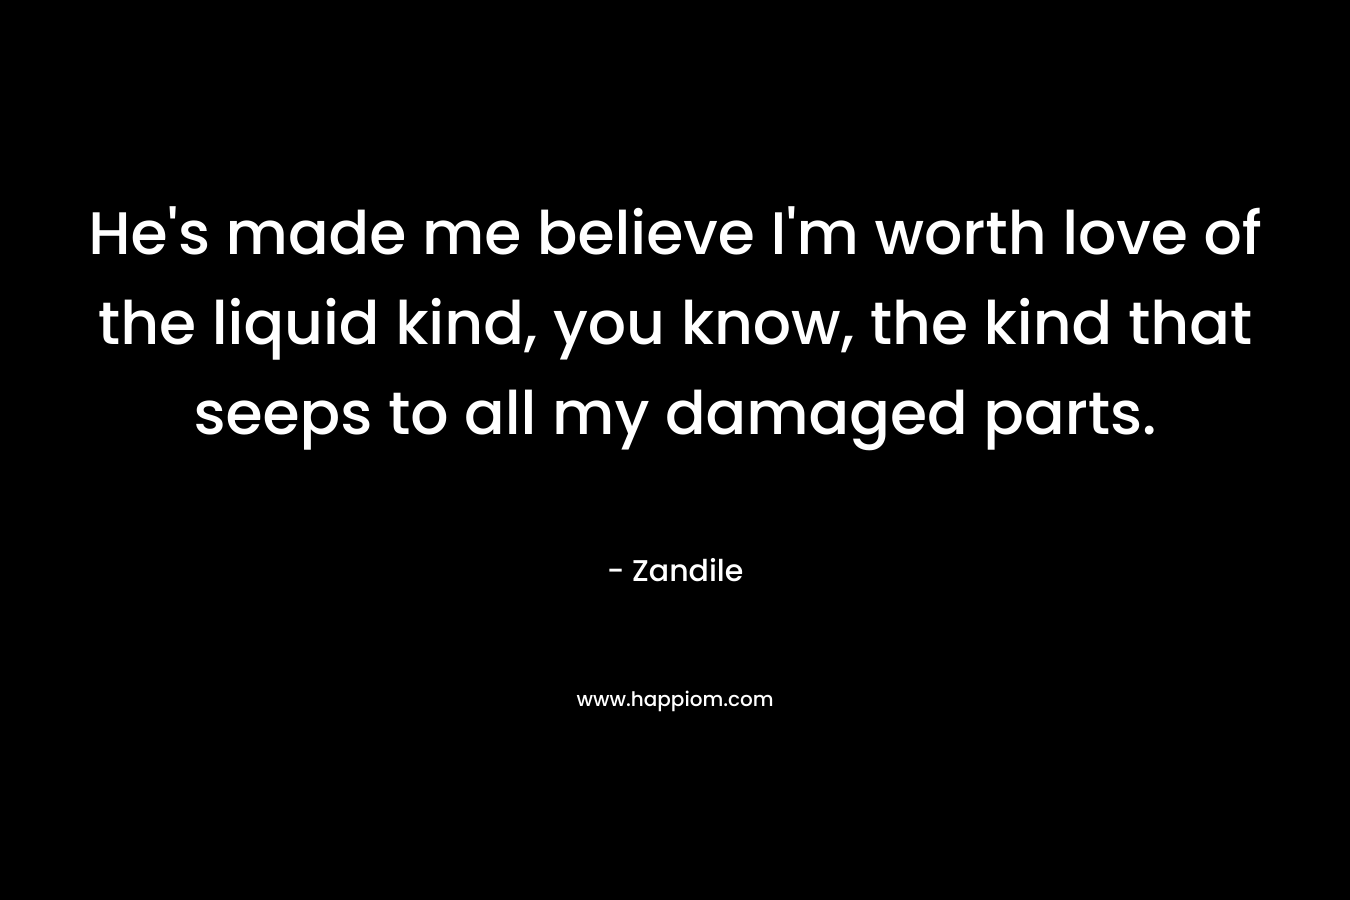 He's made me believe I'm worth love of the liquid kind, you know, the kind that seeps to all my damaged parts.